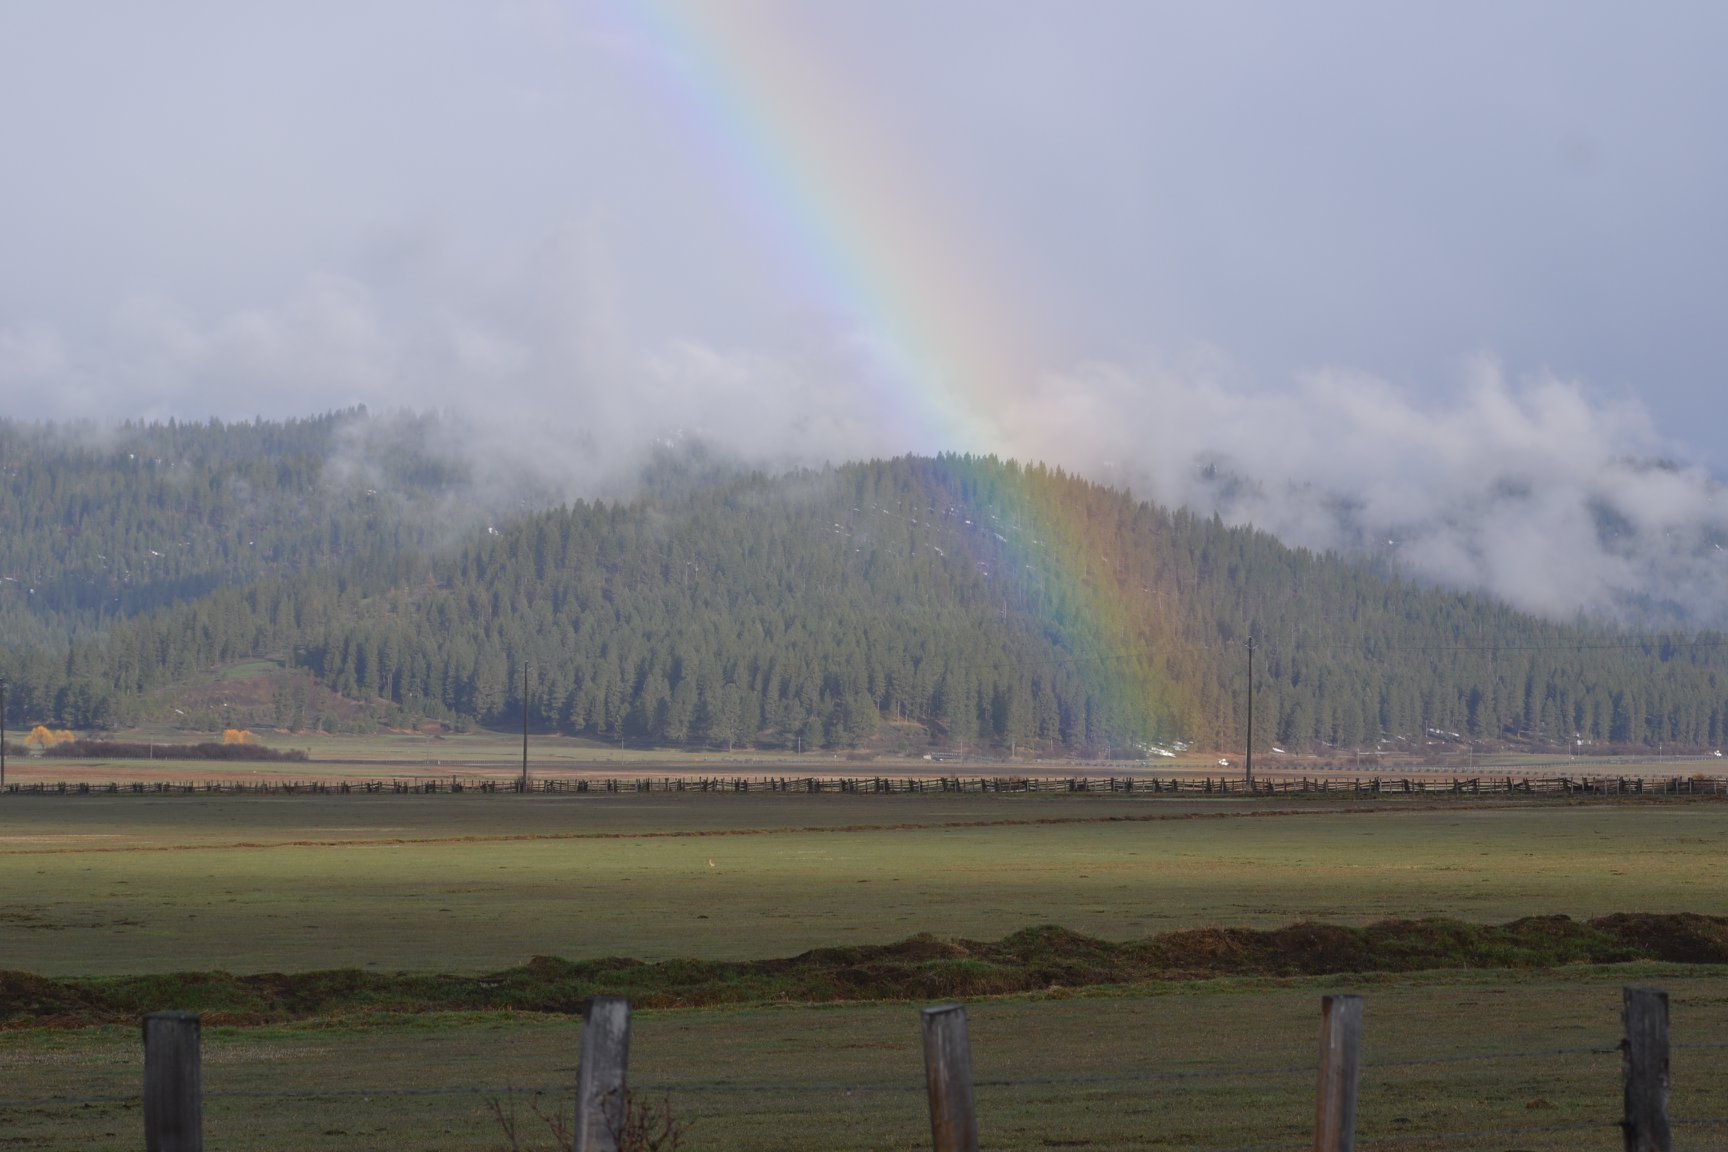 an open grassy meadow with foggy mountains in the background. A rainbow stretches across the sky and a small dot of a Long-billed curlew can be seen walking through the meadow.